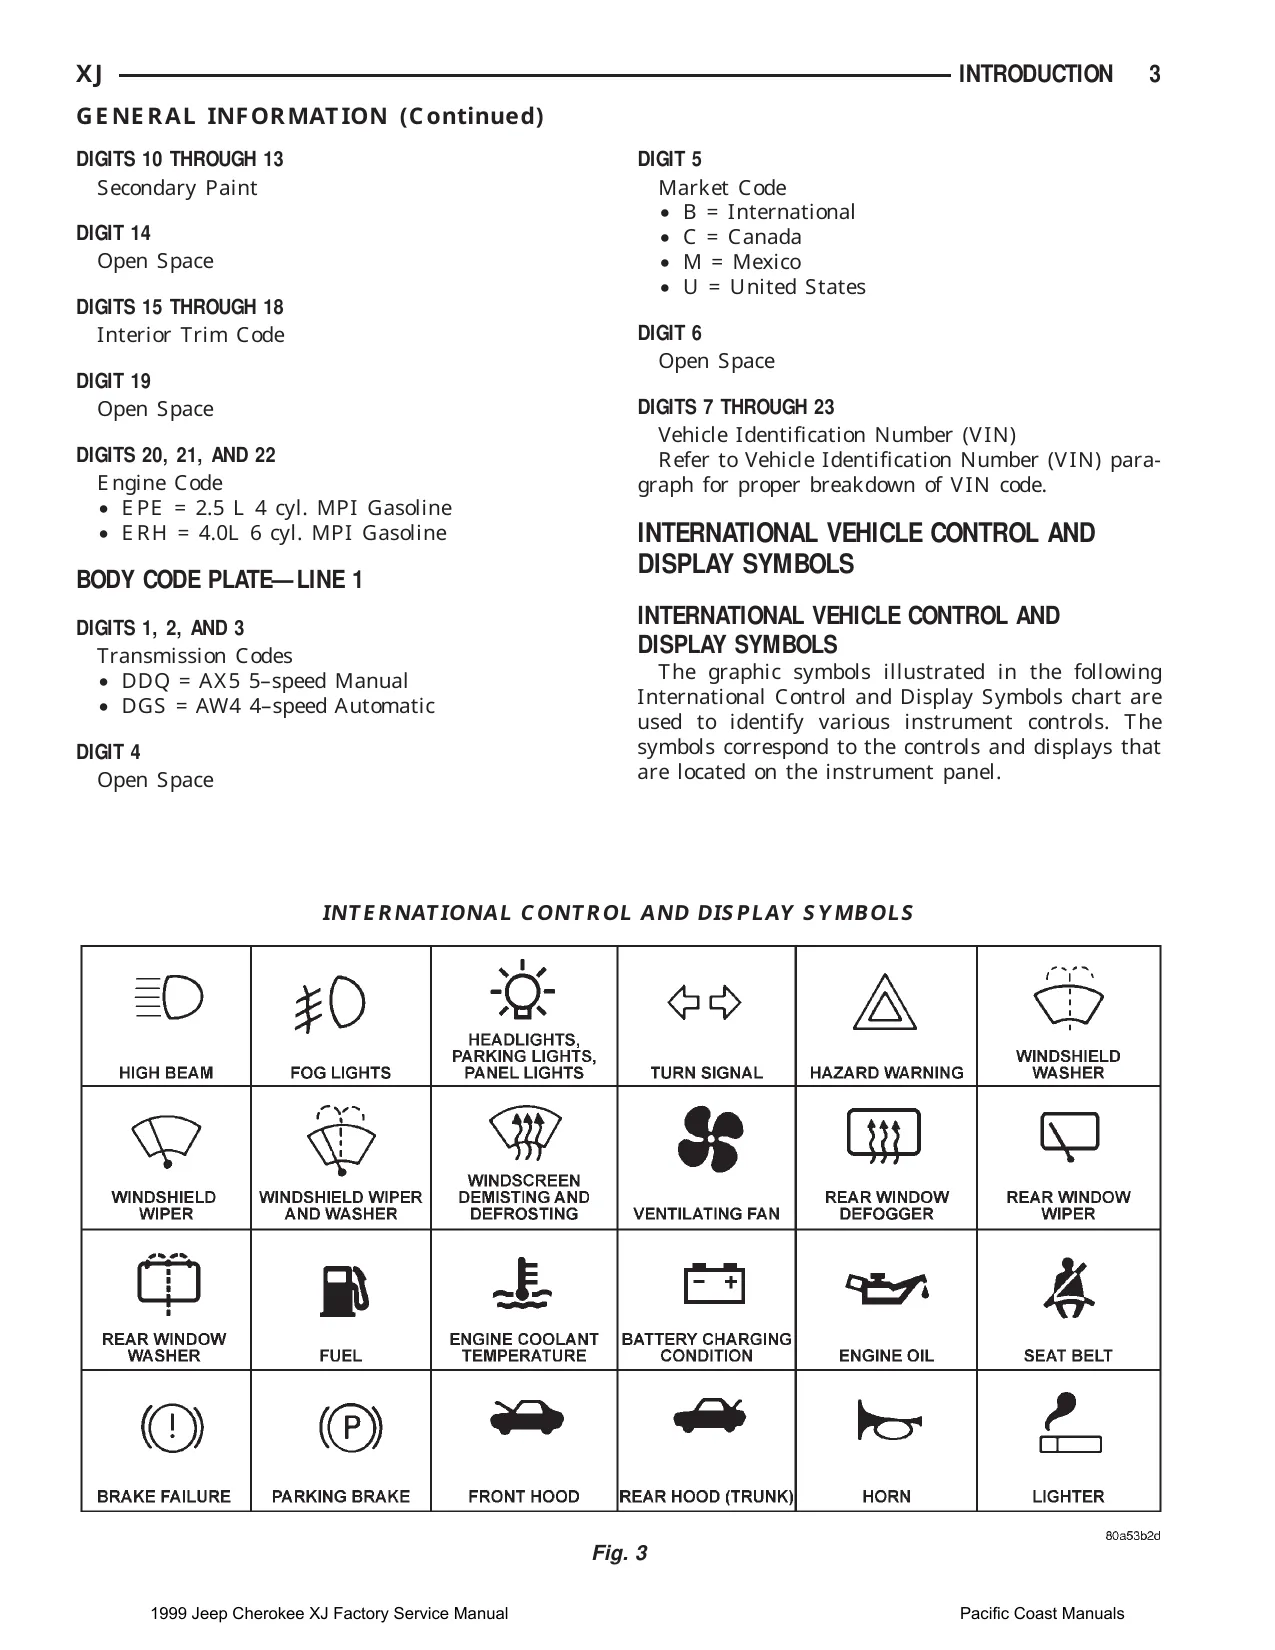 1999 Jeep Cherokee XJ, SE, Sport, Classic, and Limited Series, 2.5L, 4.0L factory service manual Preview image 5